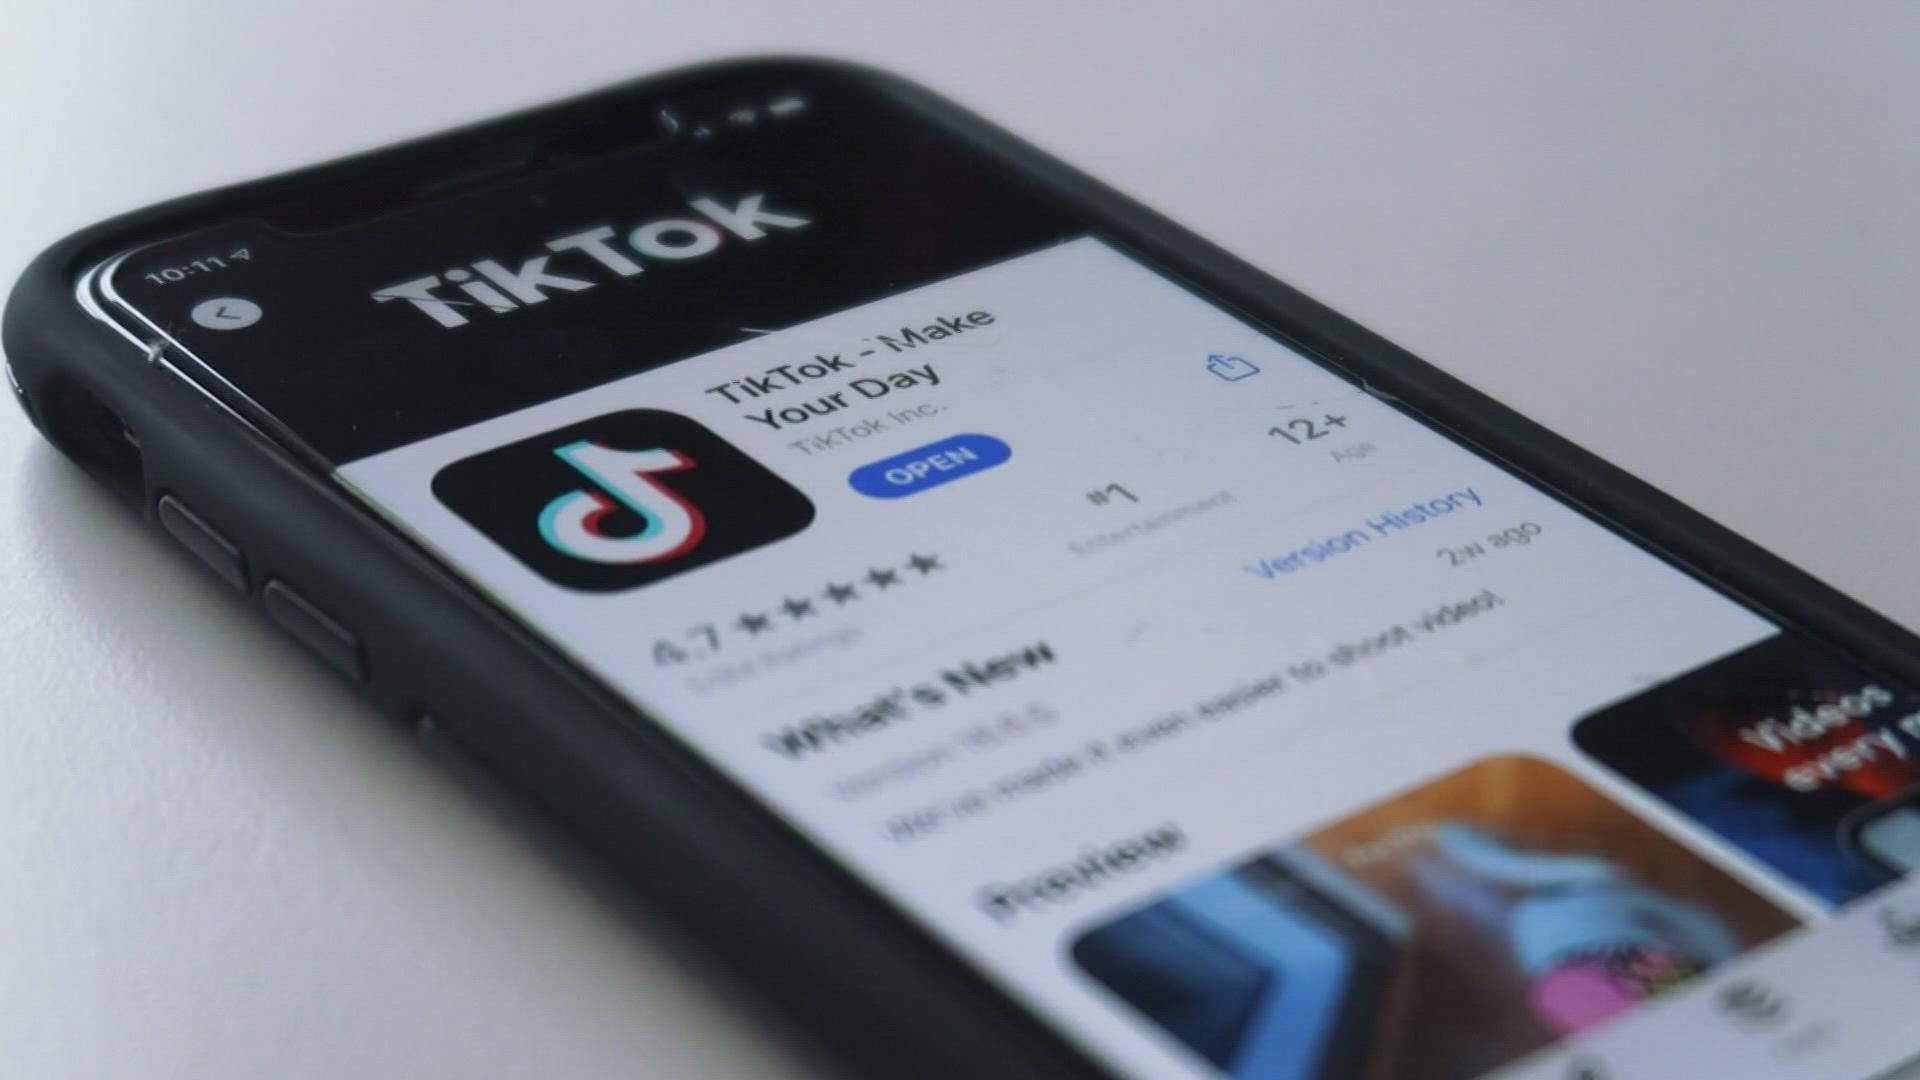 The New York Times says some are using TikTok since the videos are easier for them to understand.